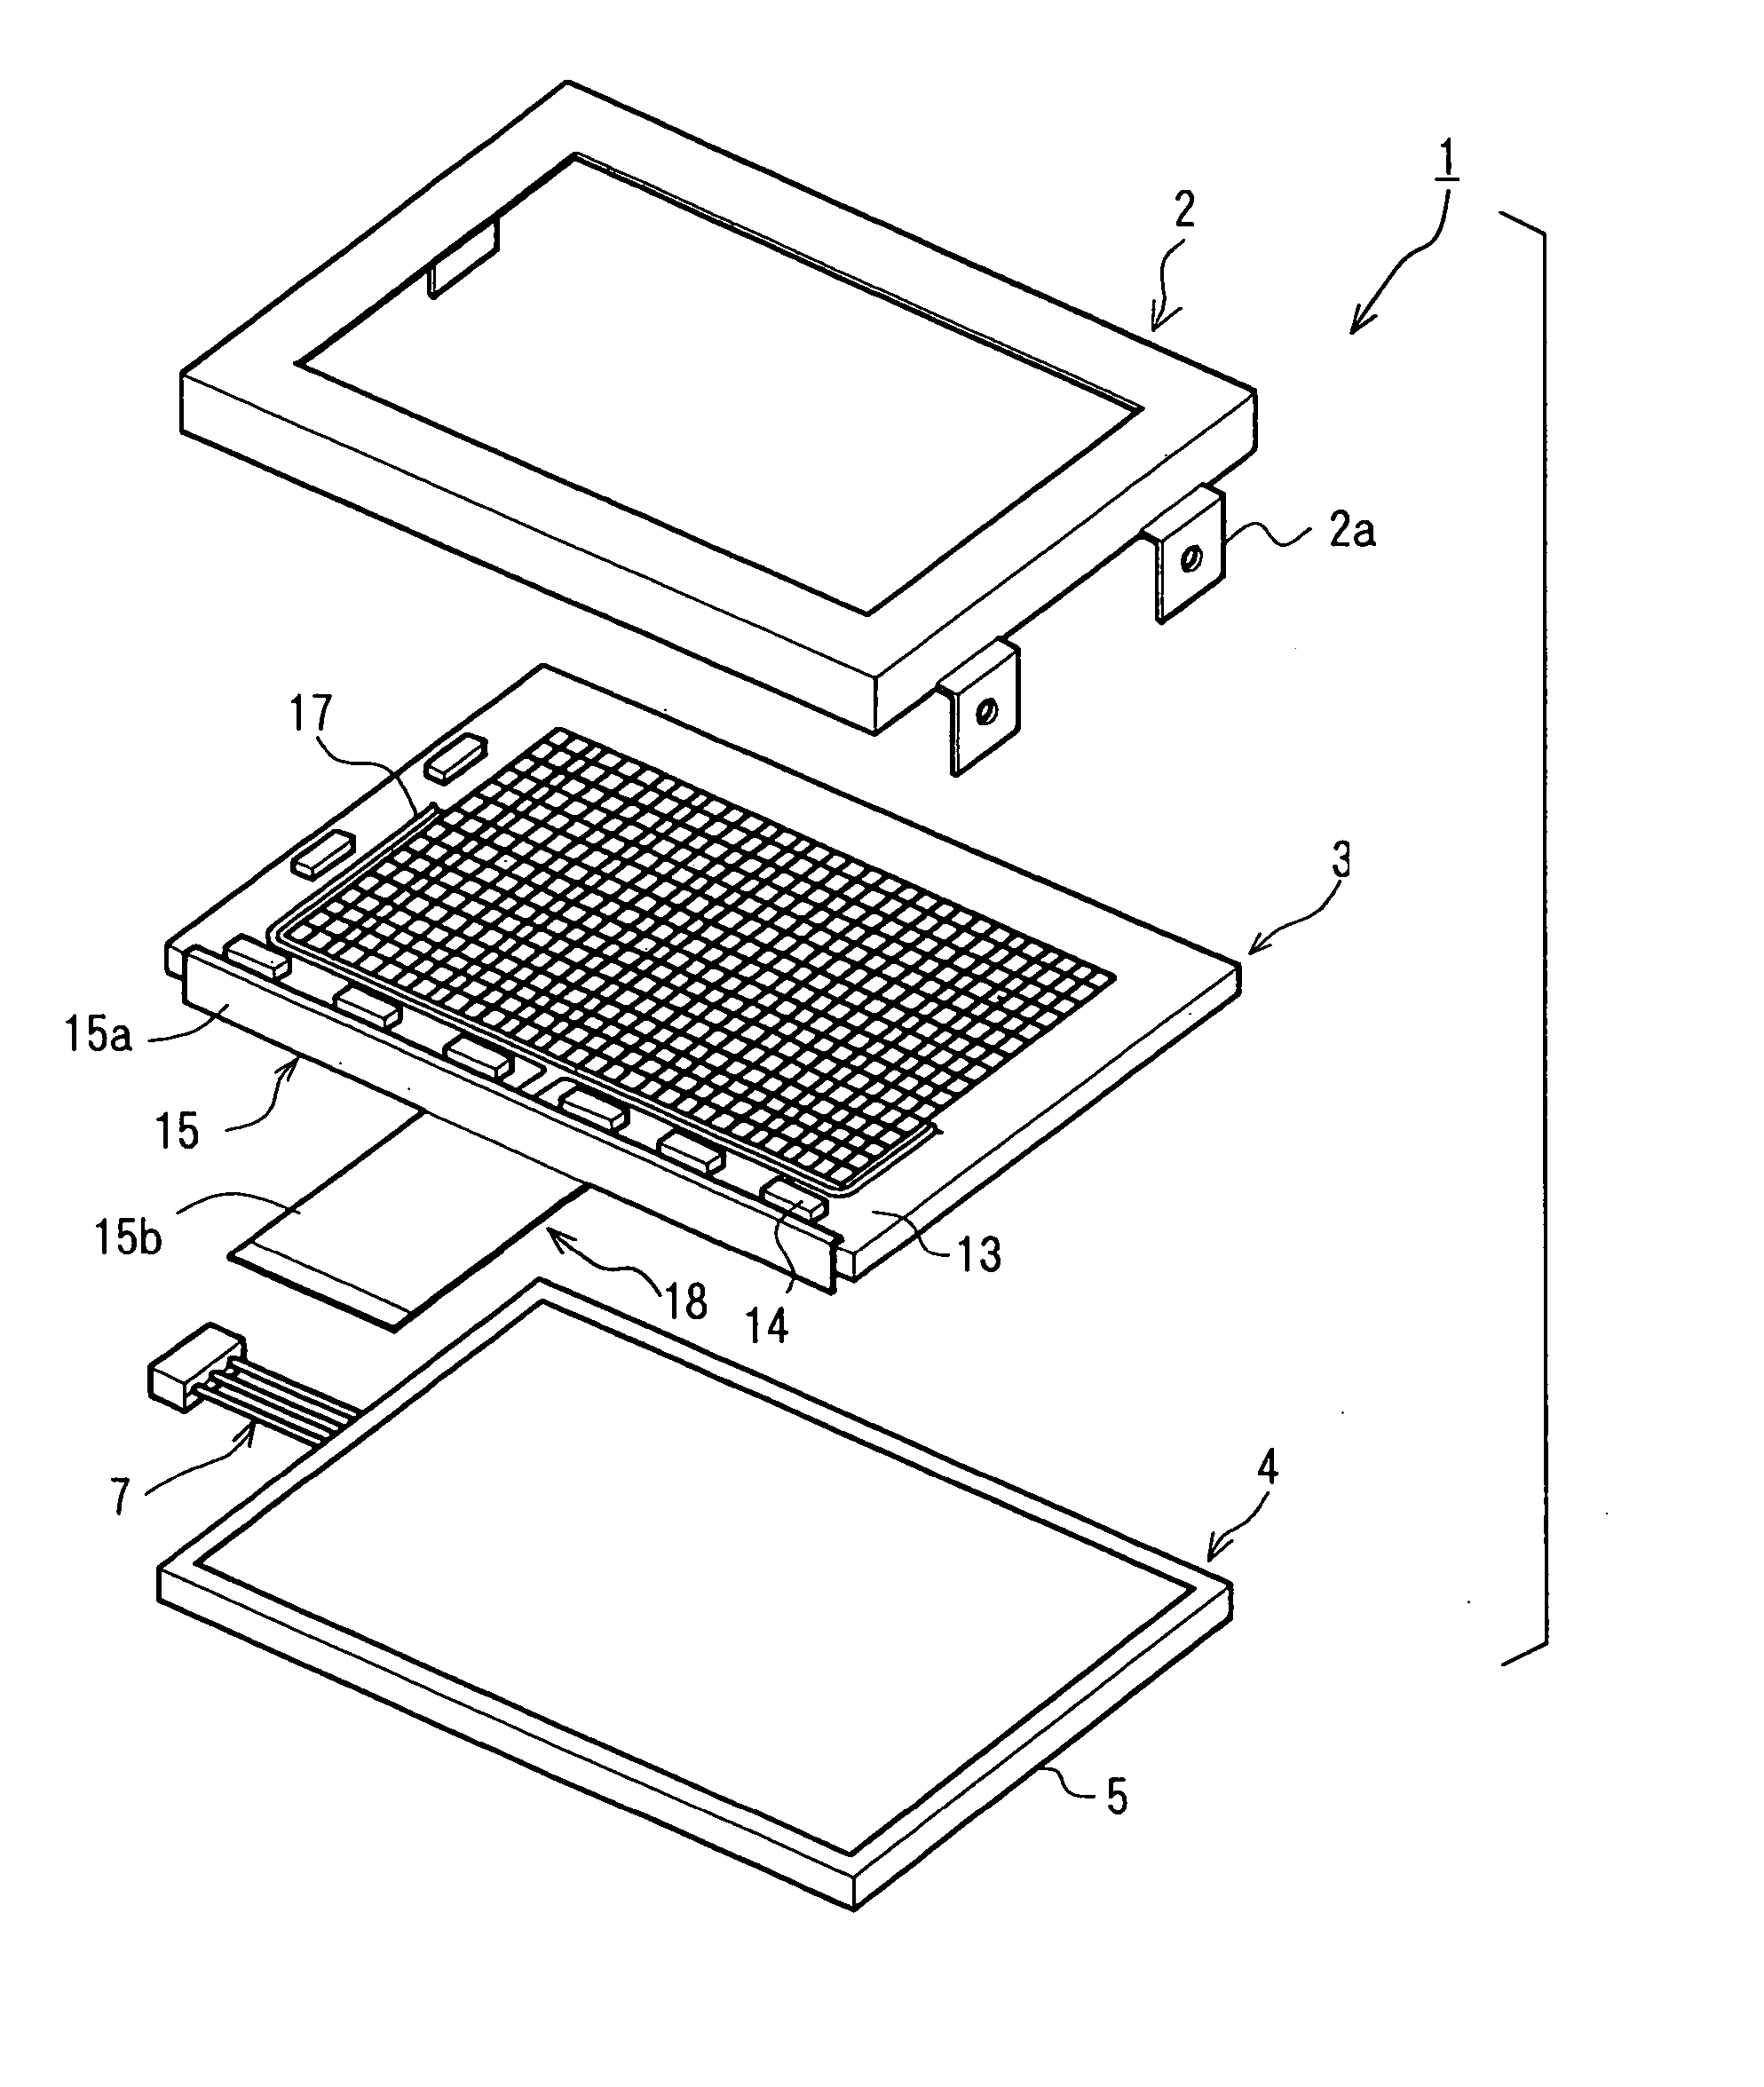 Display panel having noise shielding structure